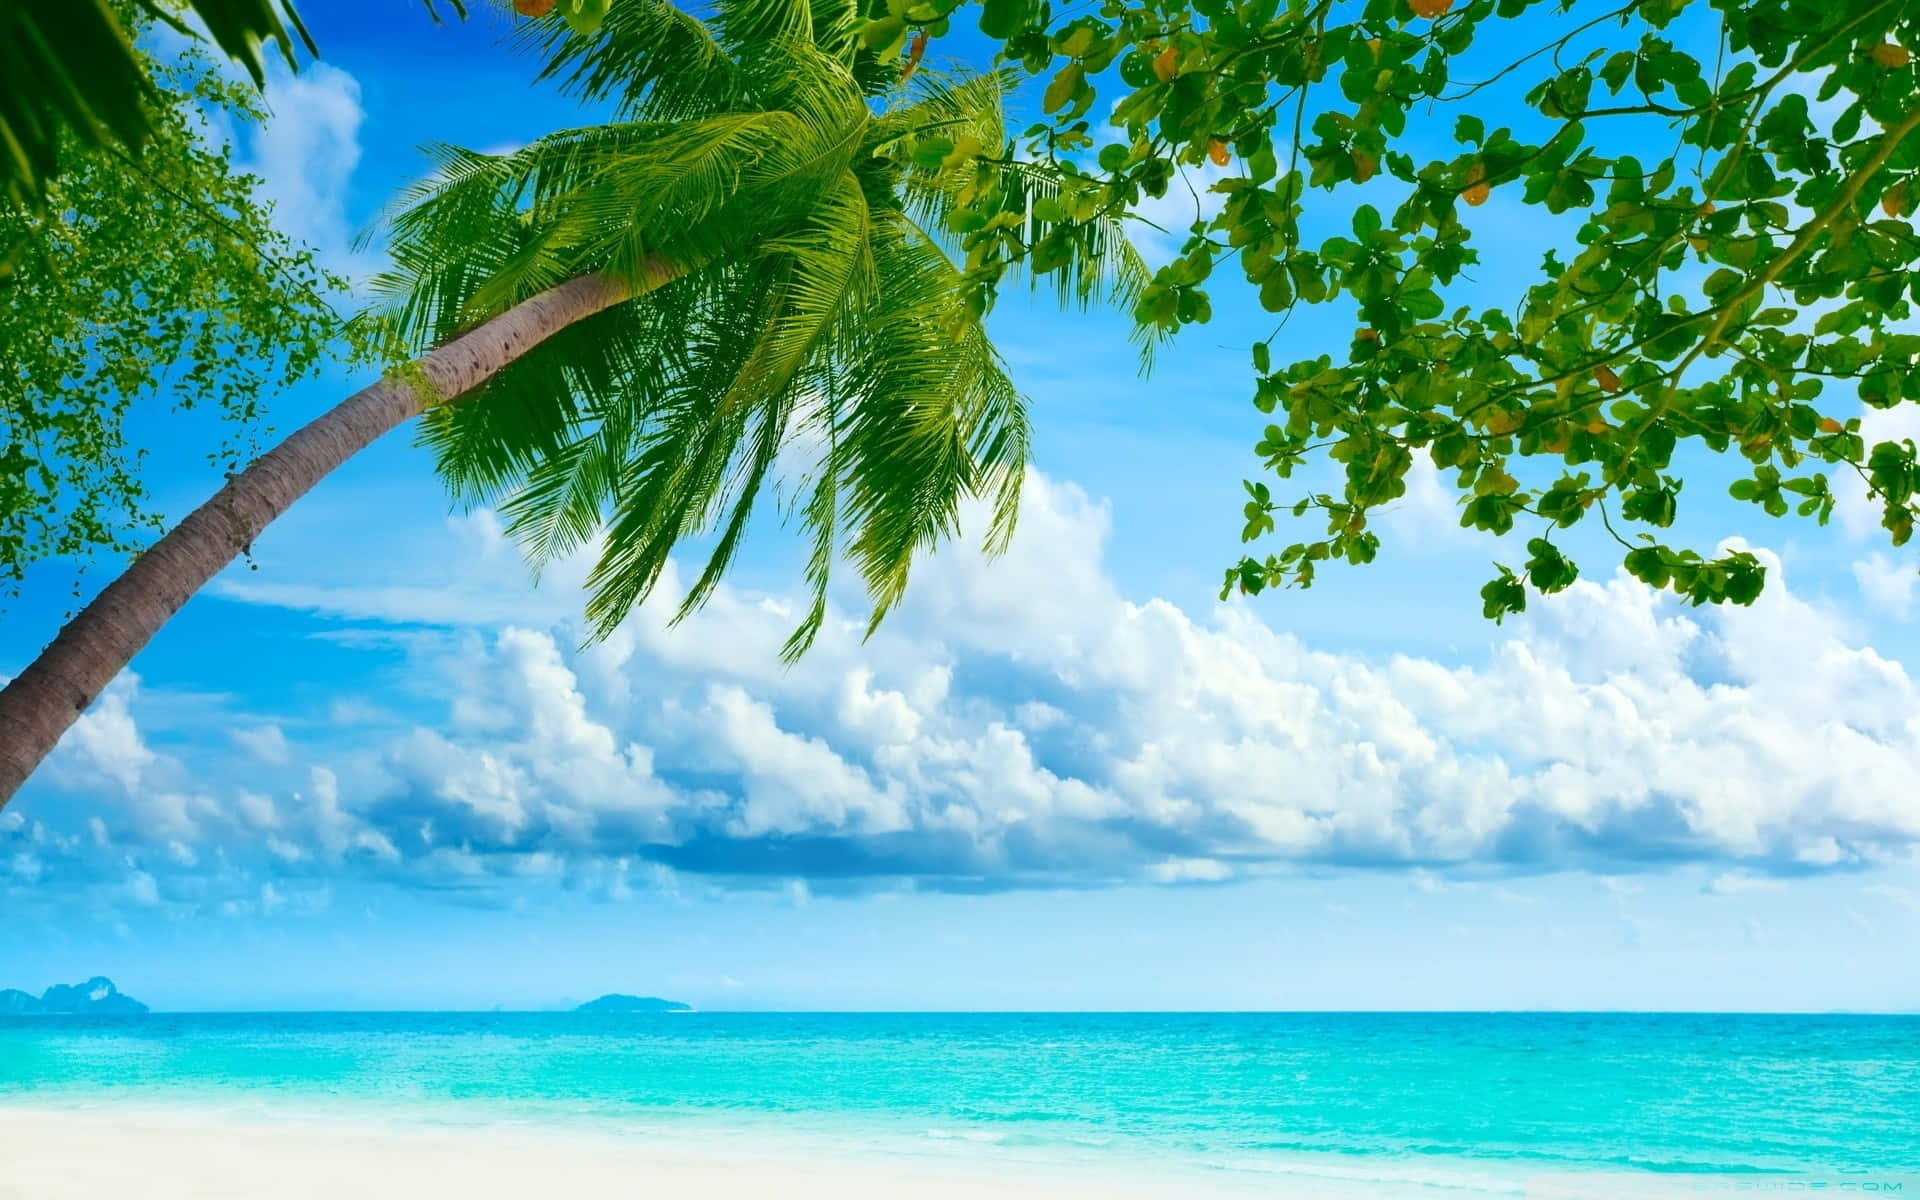 Feel rejuvenated and immersed in nature in this Hi Res Beach paradise. Wallpaper